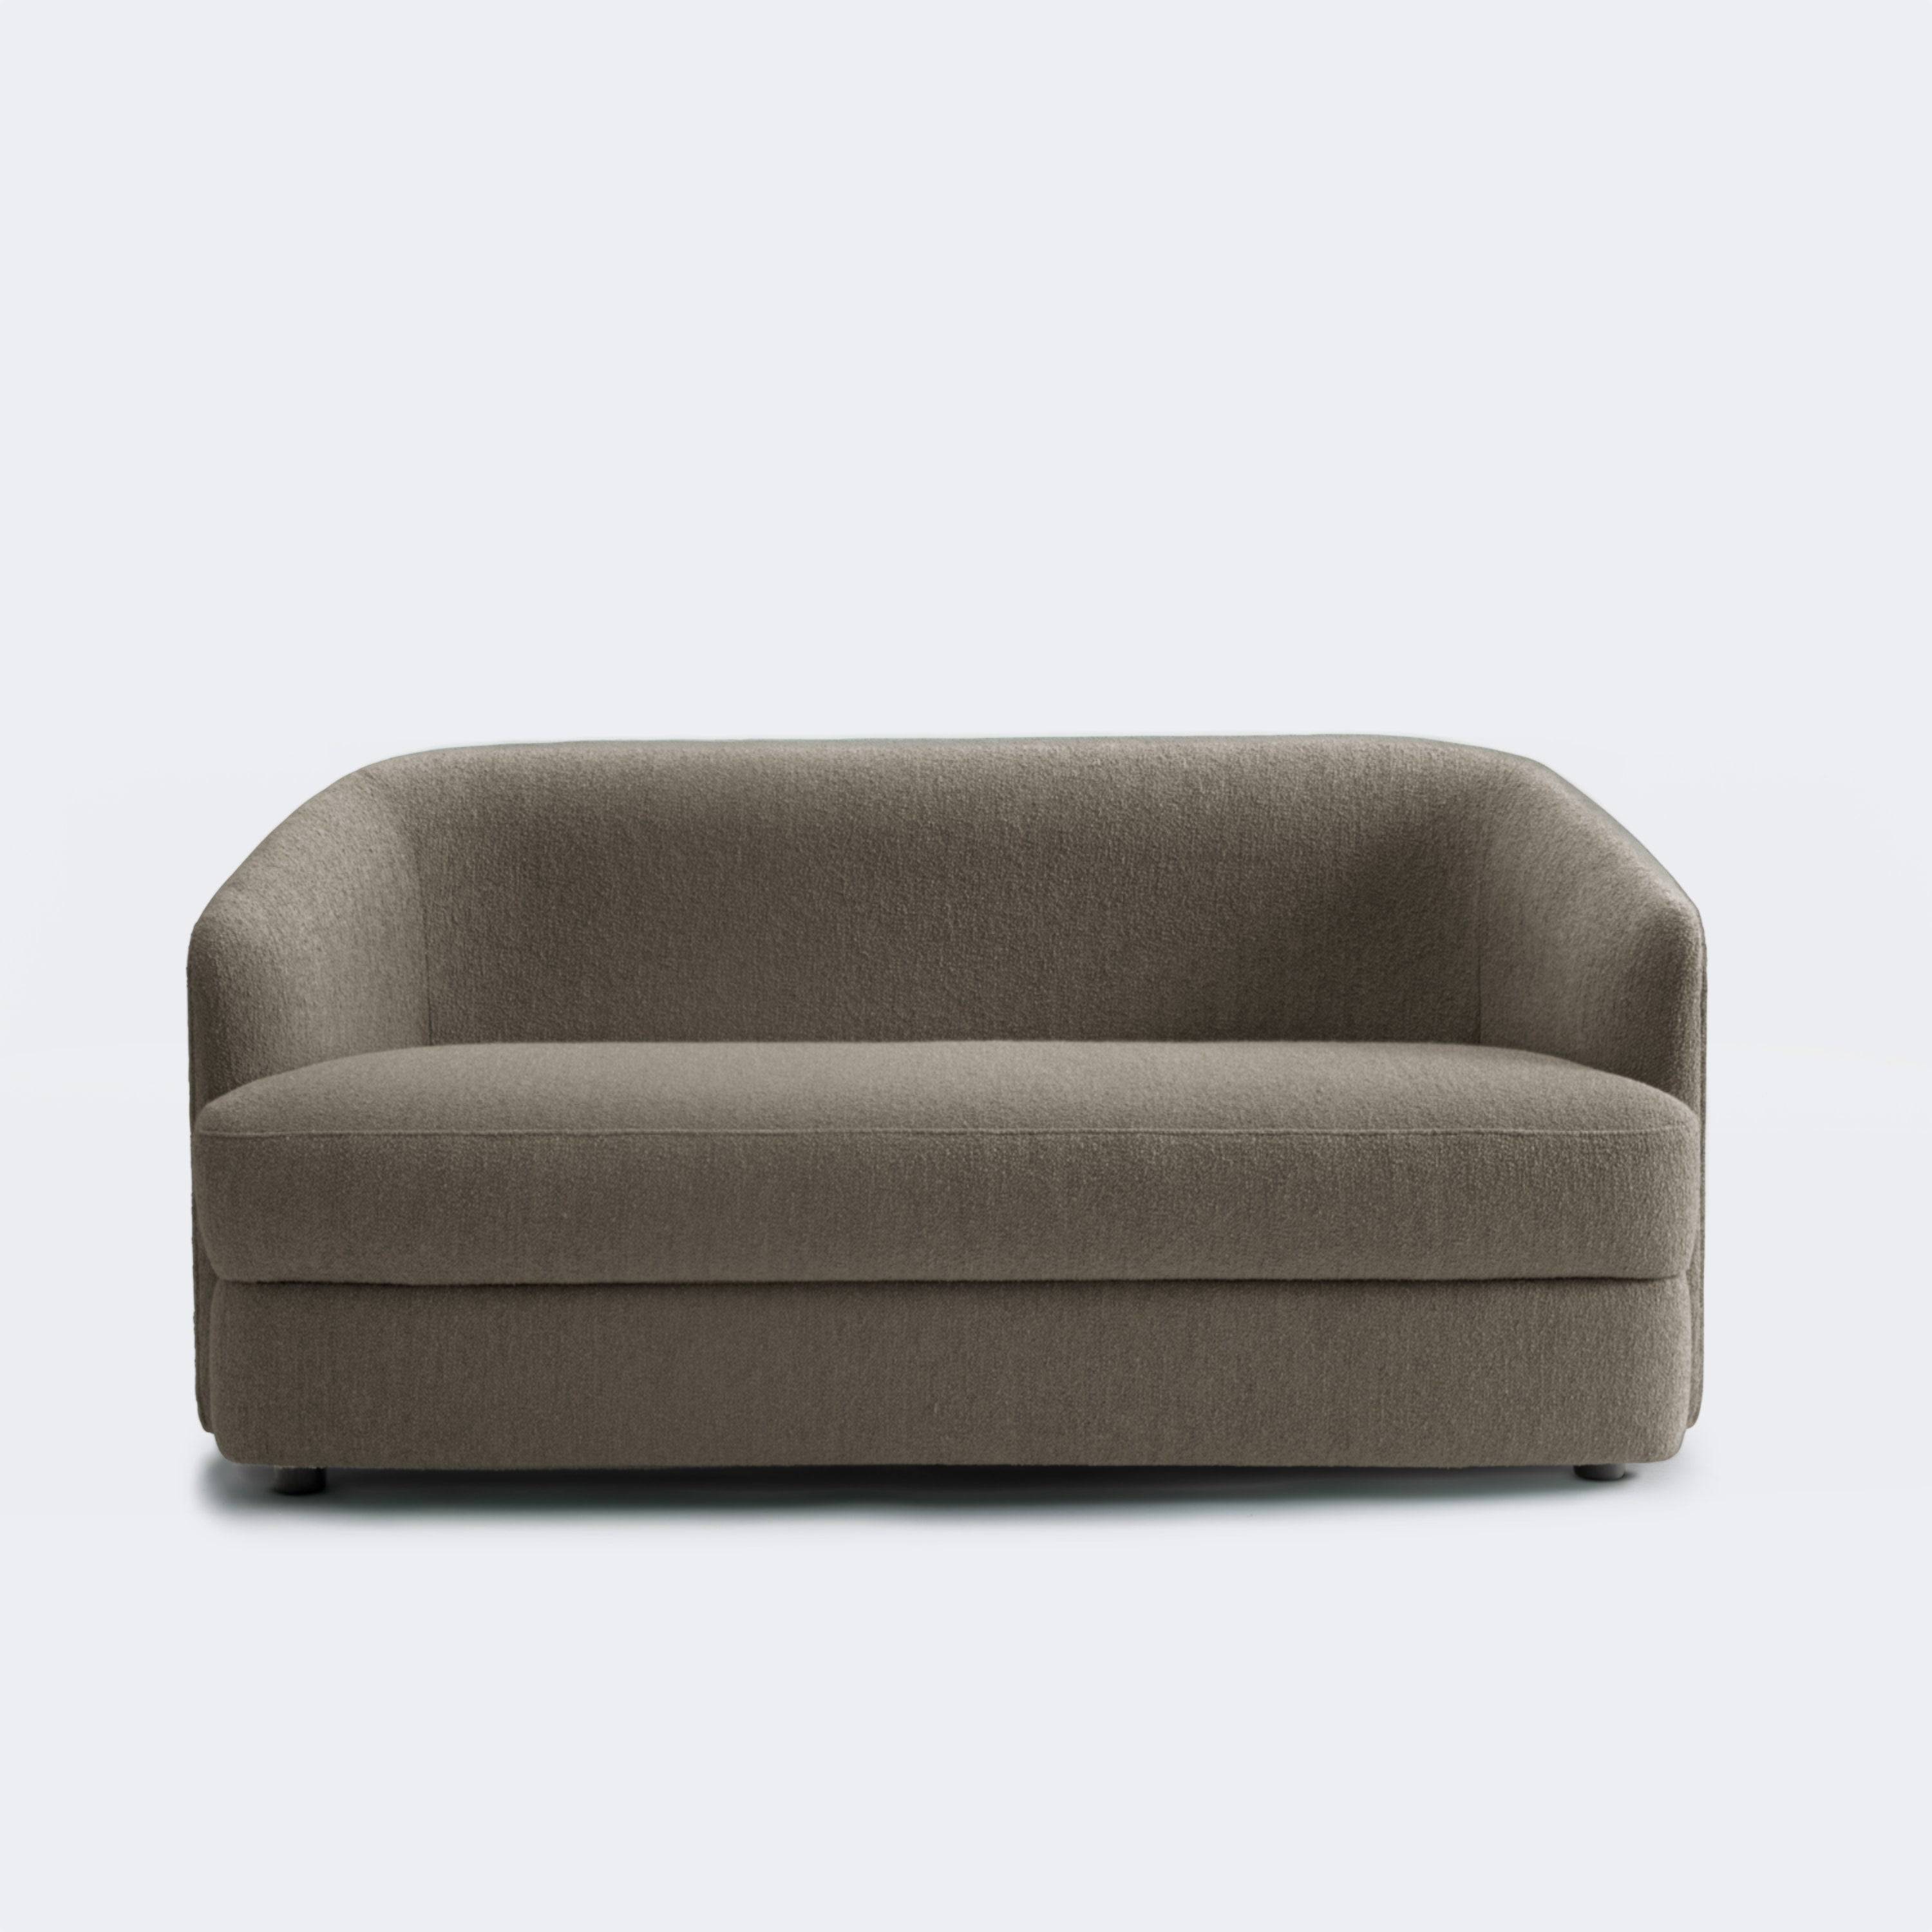 New Works Covent Sofa Deep, 2 Seater Dark Taupe - KANSO#Upholstery_Dark Taupe